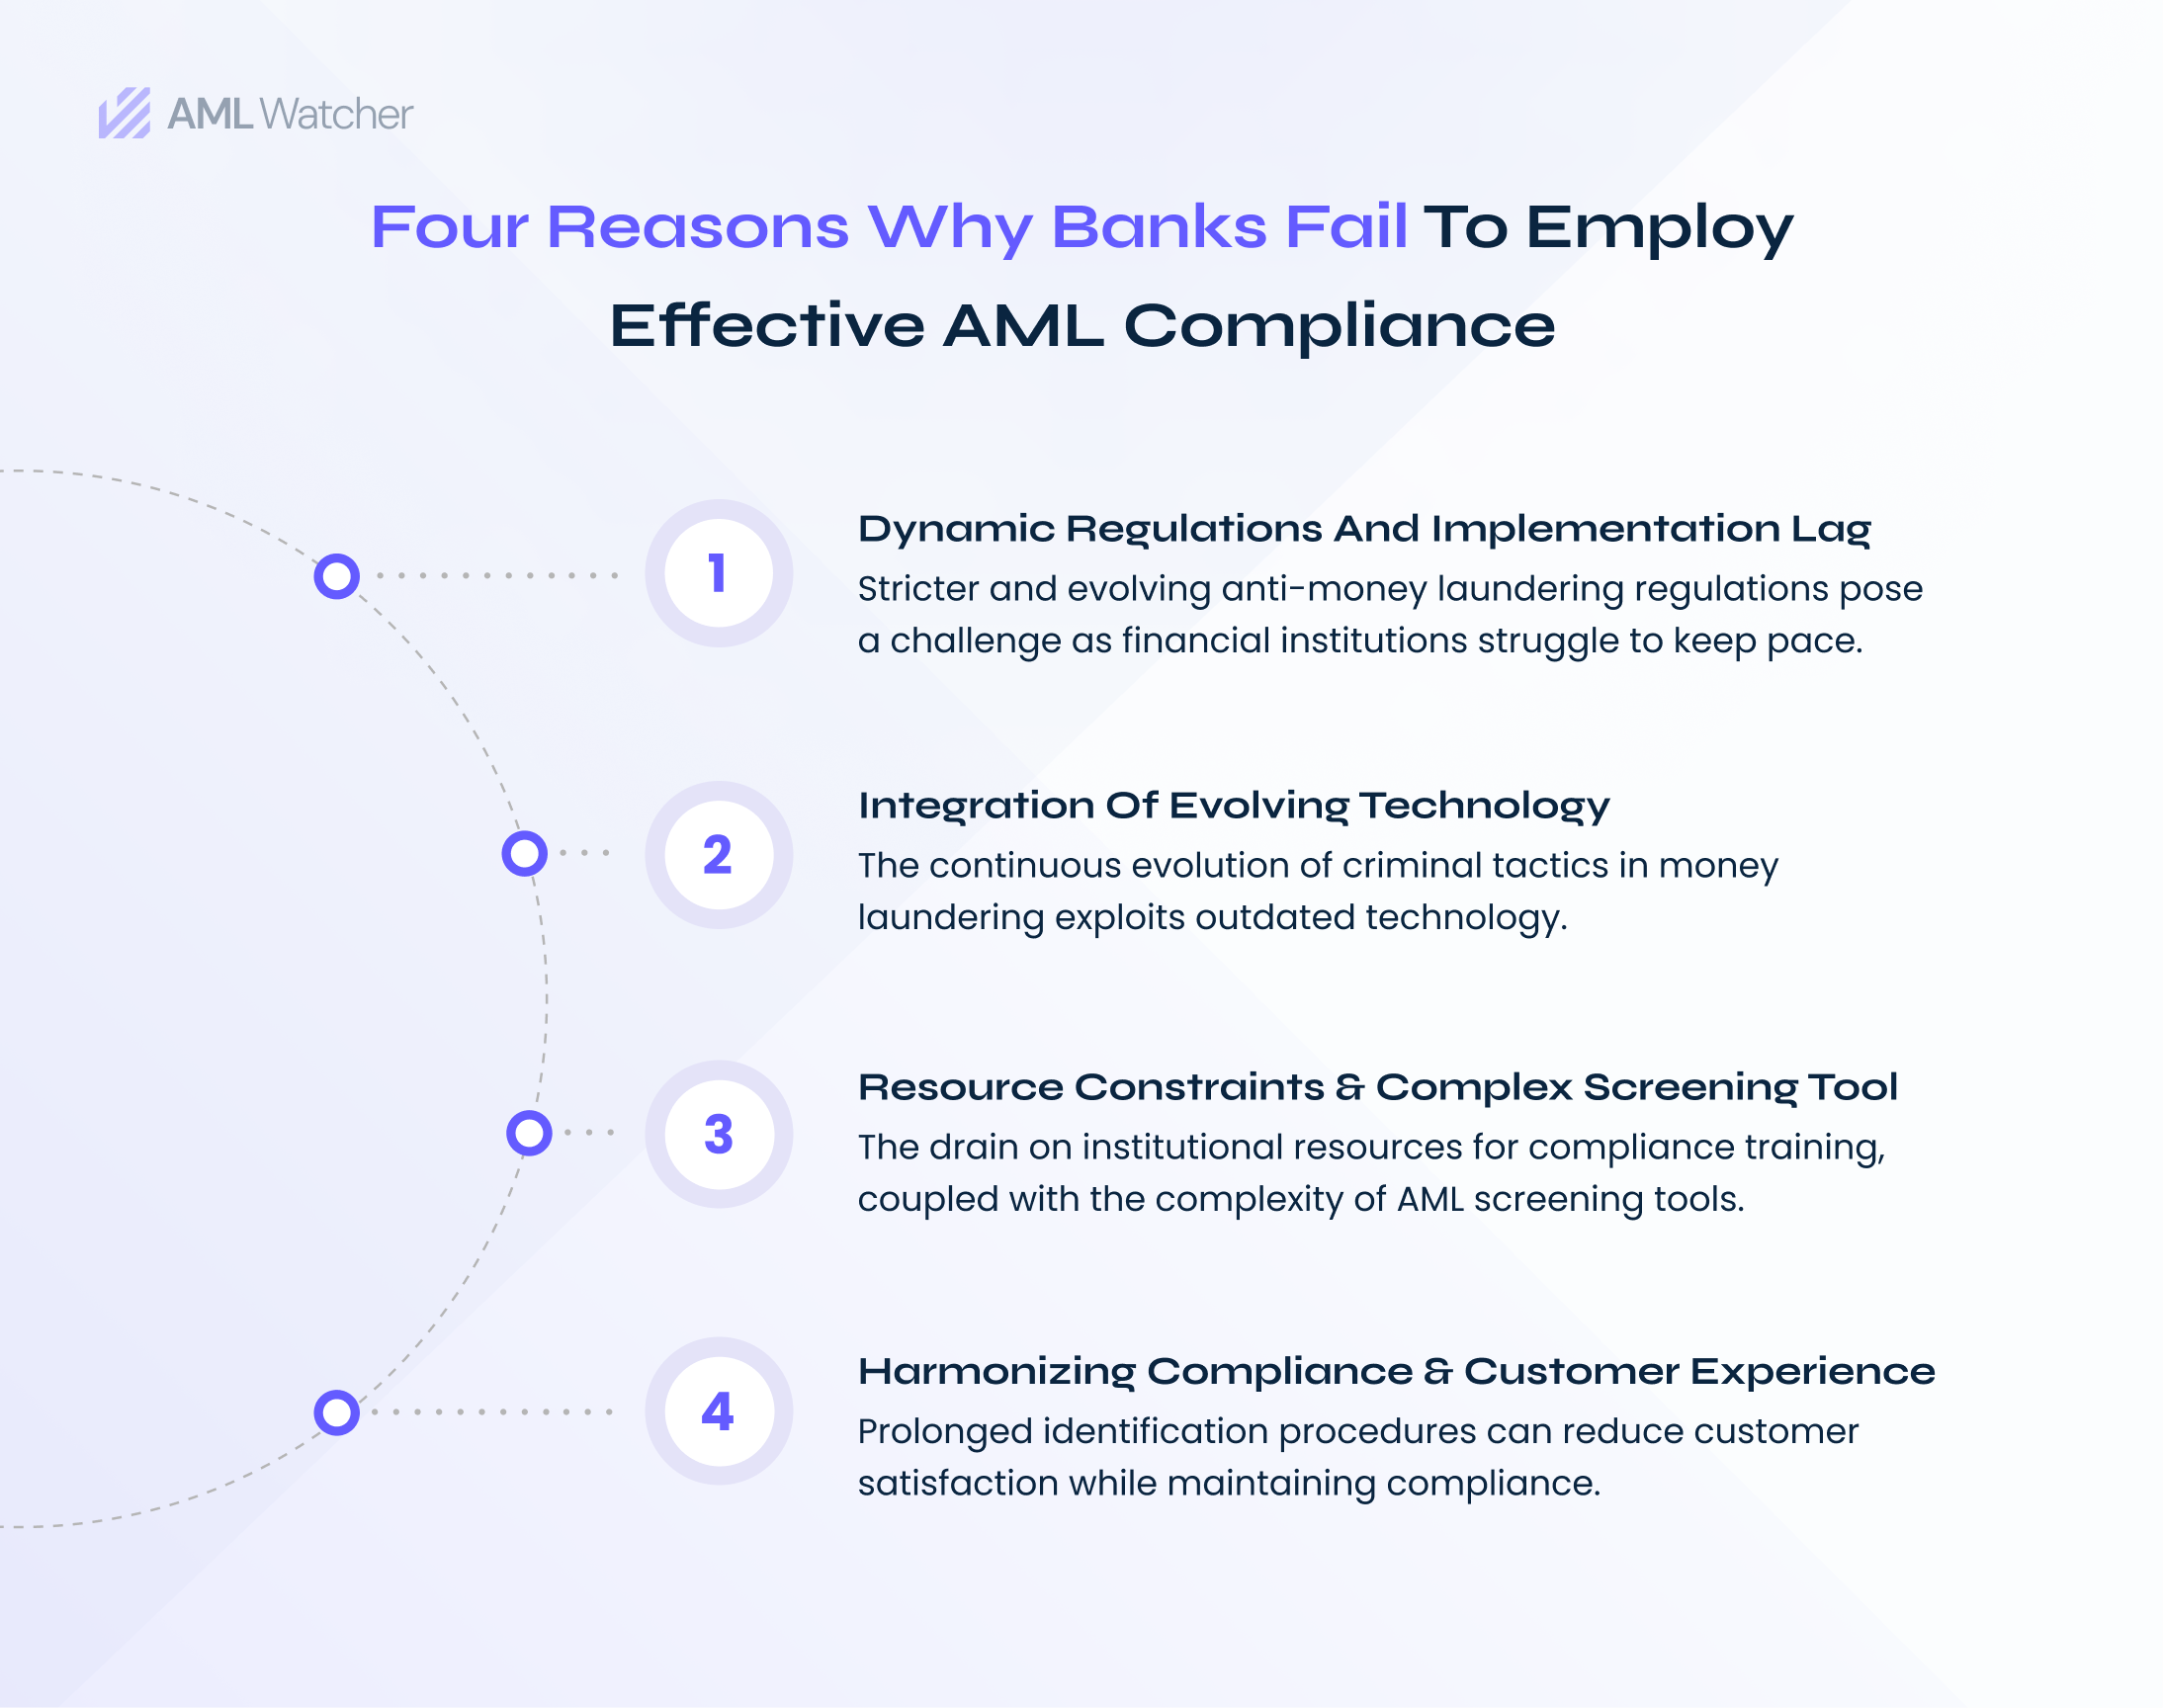 The visual reveals the key factors that lead the banks to AML non-compliance. It includes dynamic regulations & implementation lags, integration of technology, resource constraints and complex screening tools, and lastly compliance requirements & customer experience.